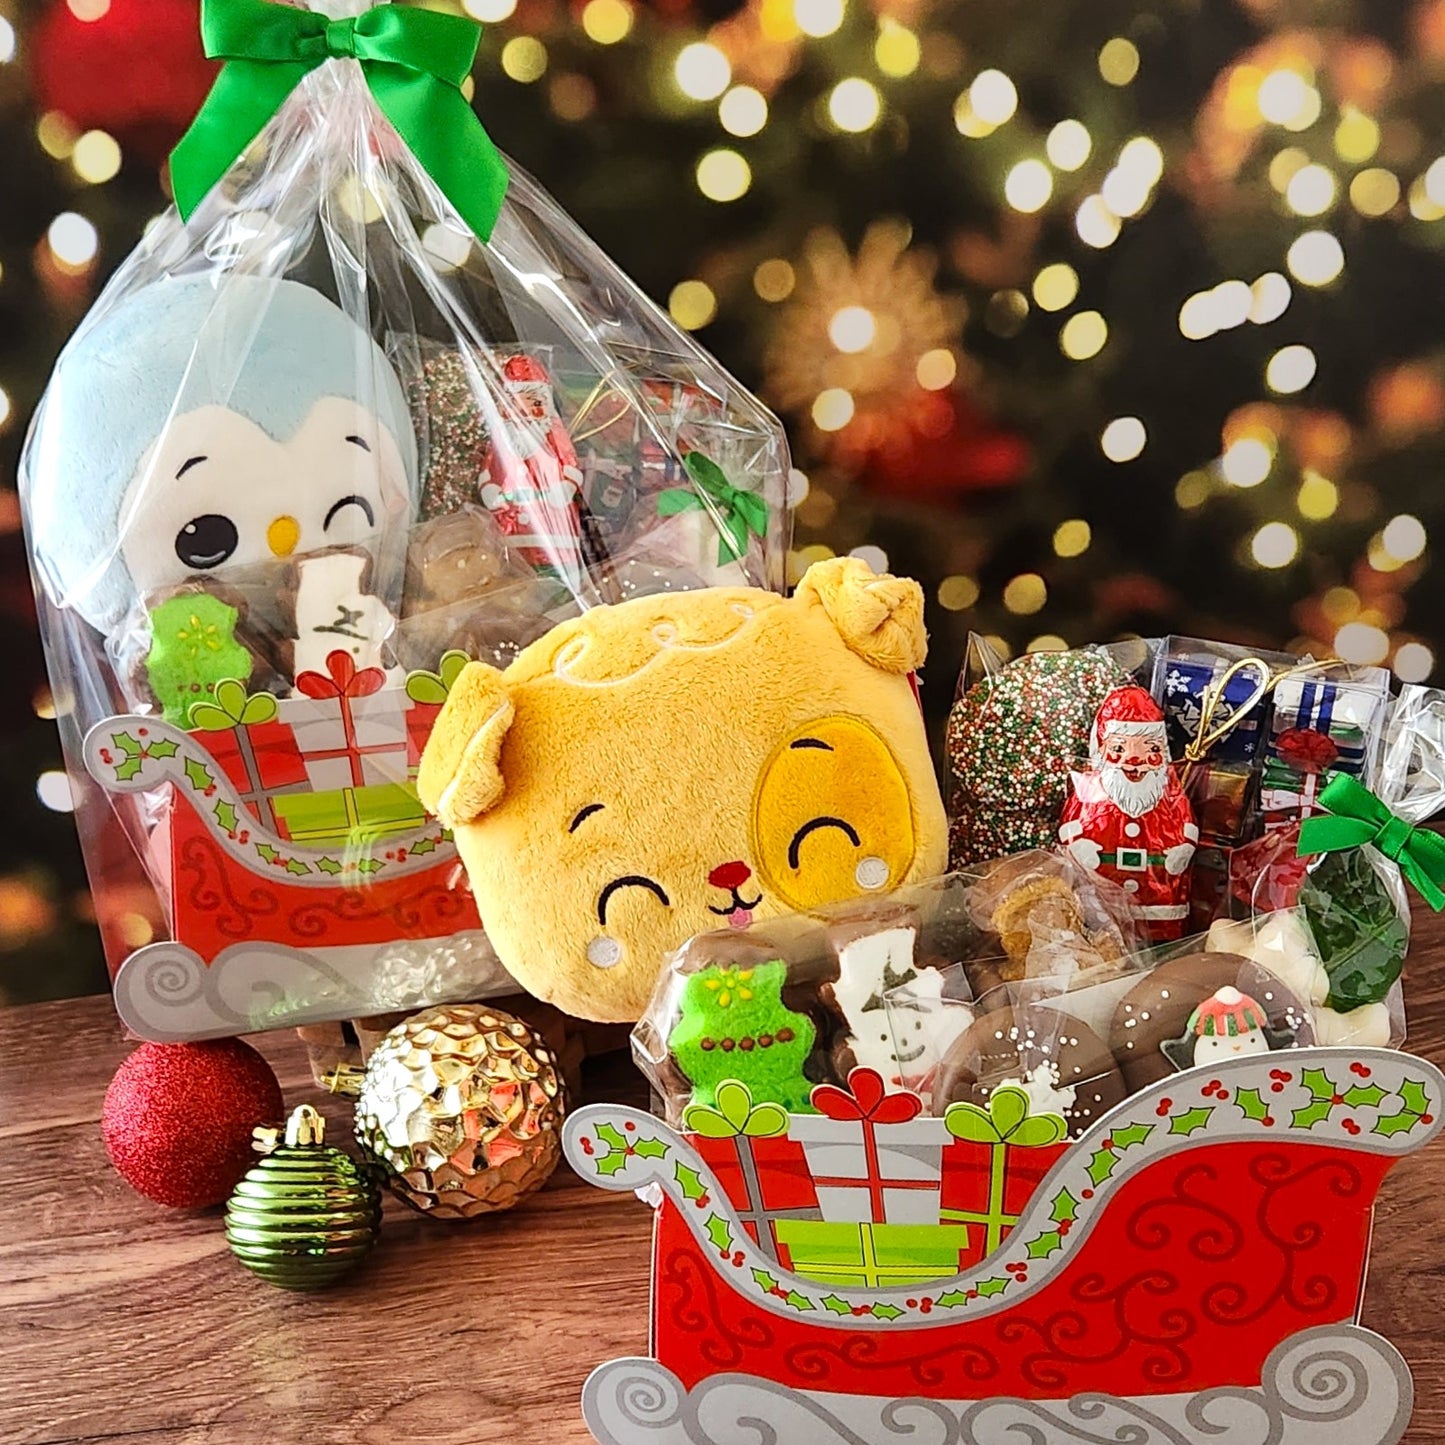 A cute Christmas gift including stuffed animal, Milk Chocolate Foiled Presents, Foiled Santa Claus, Chocolate dipped Peeps, nonpareils, festive Holiday Oreos, and a bag of Holiday Gummi! 